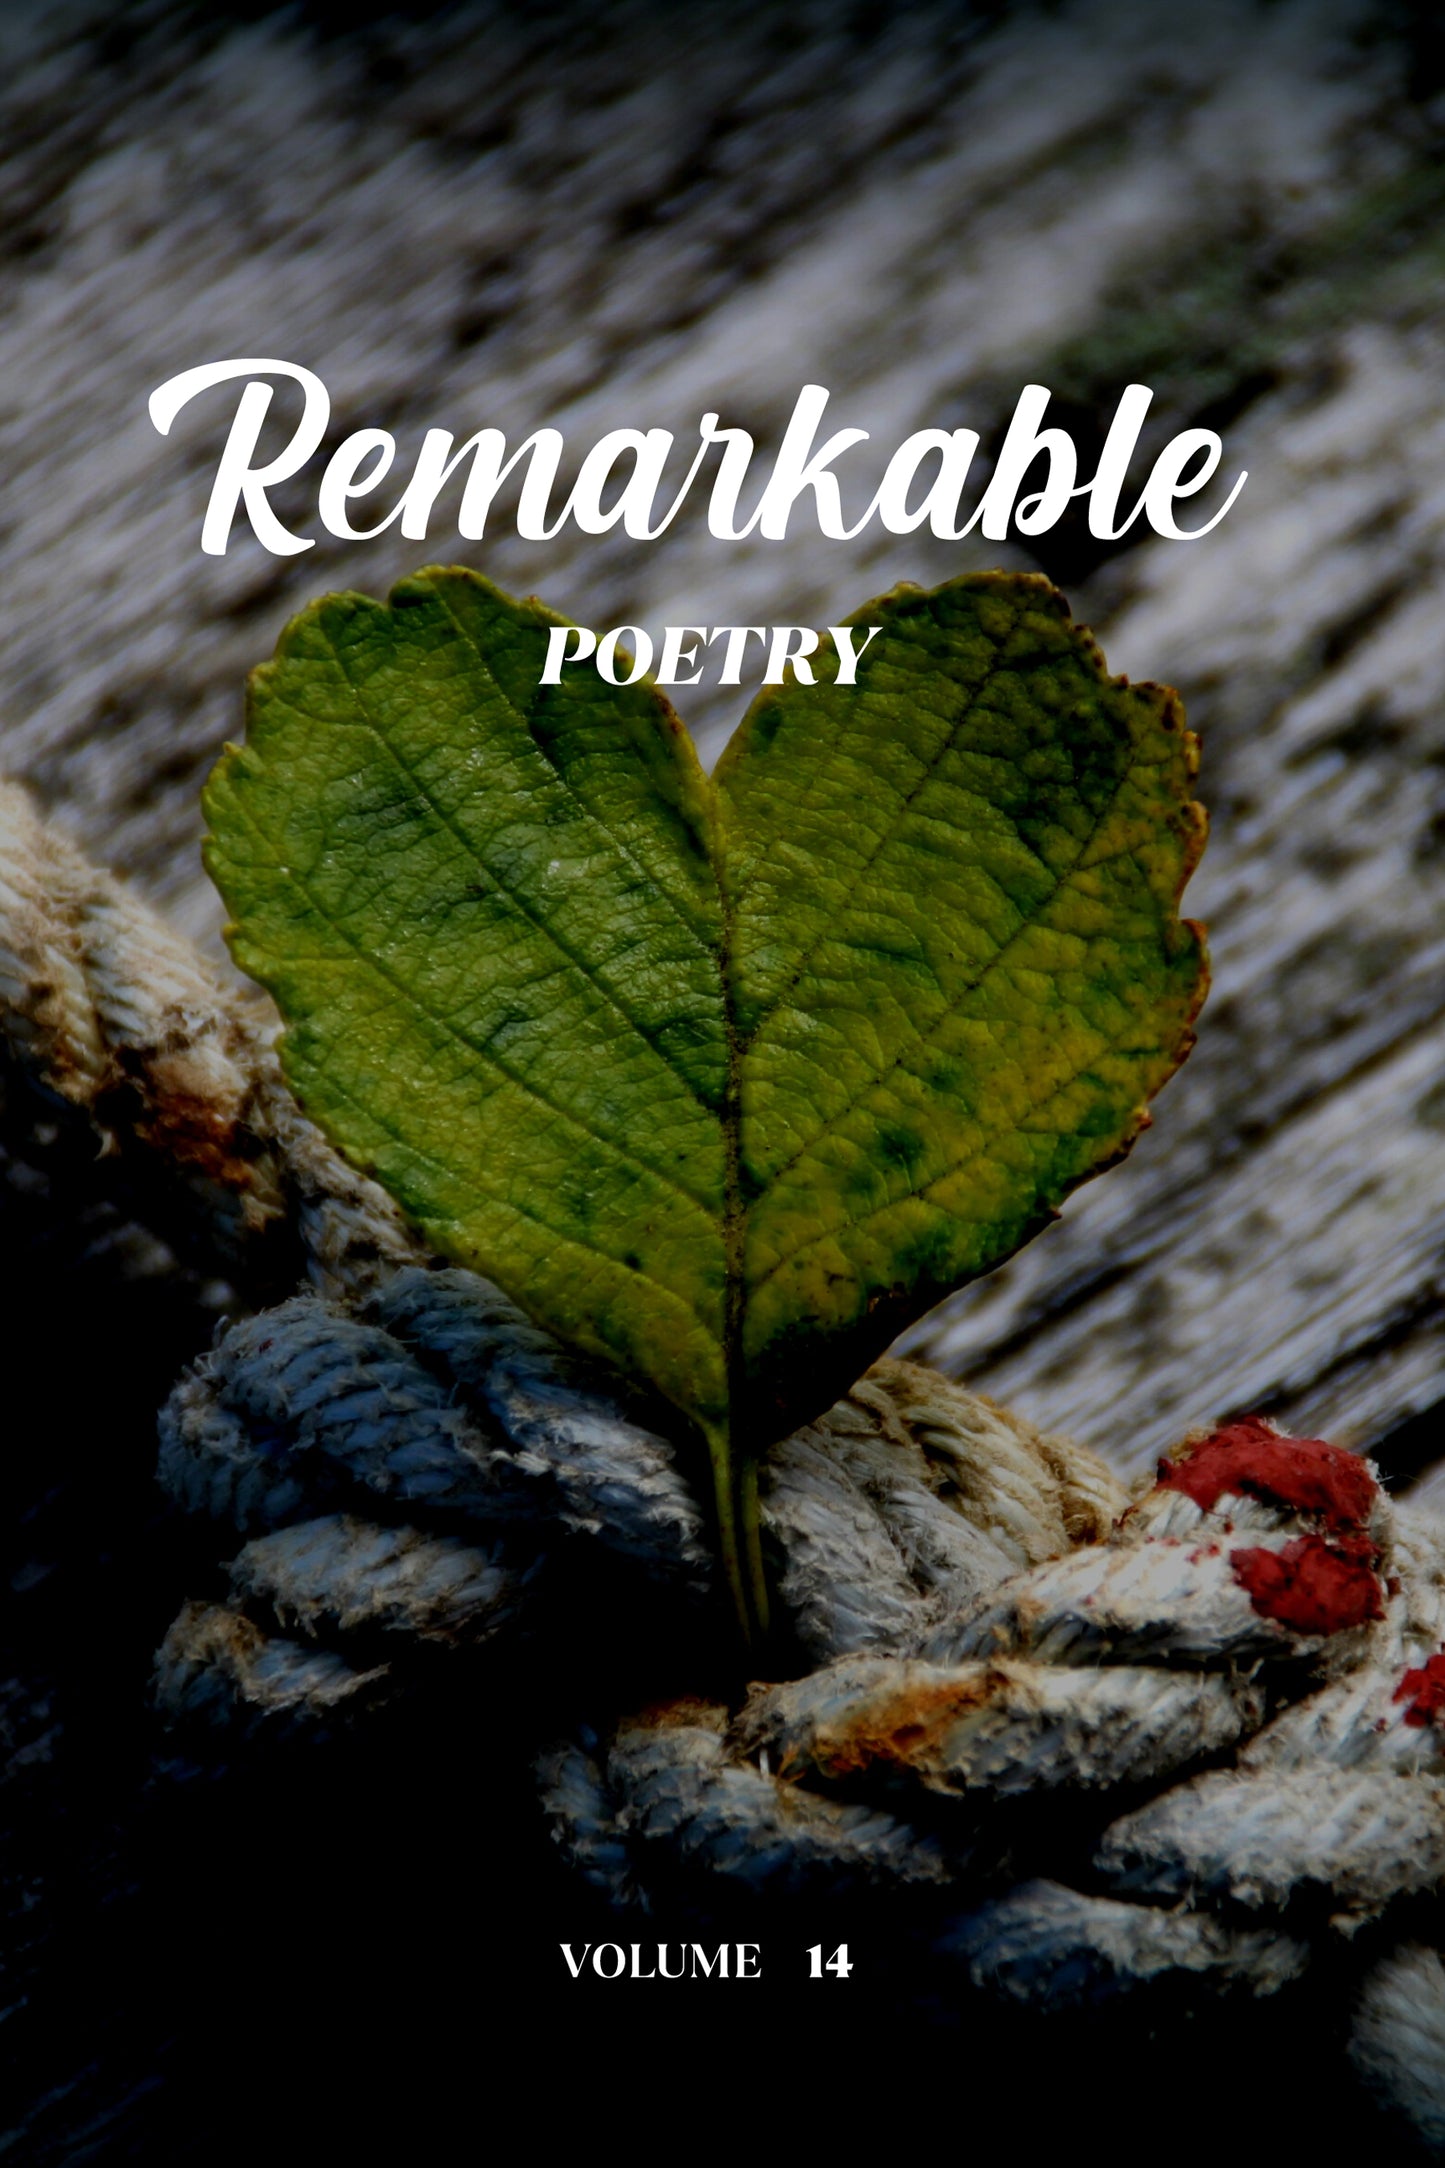 Remarkable Poetry (Volume 14) - Physical Book